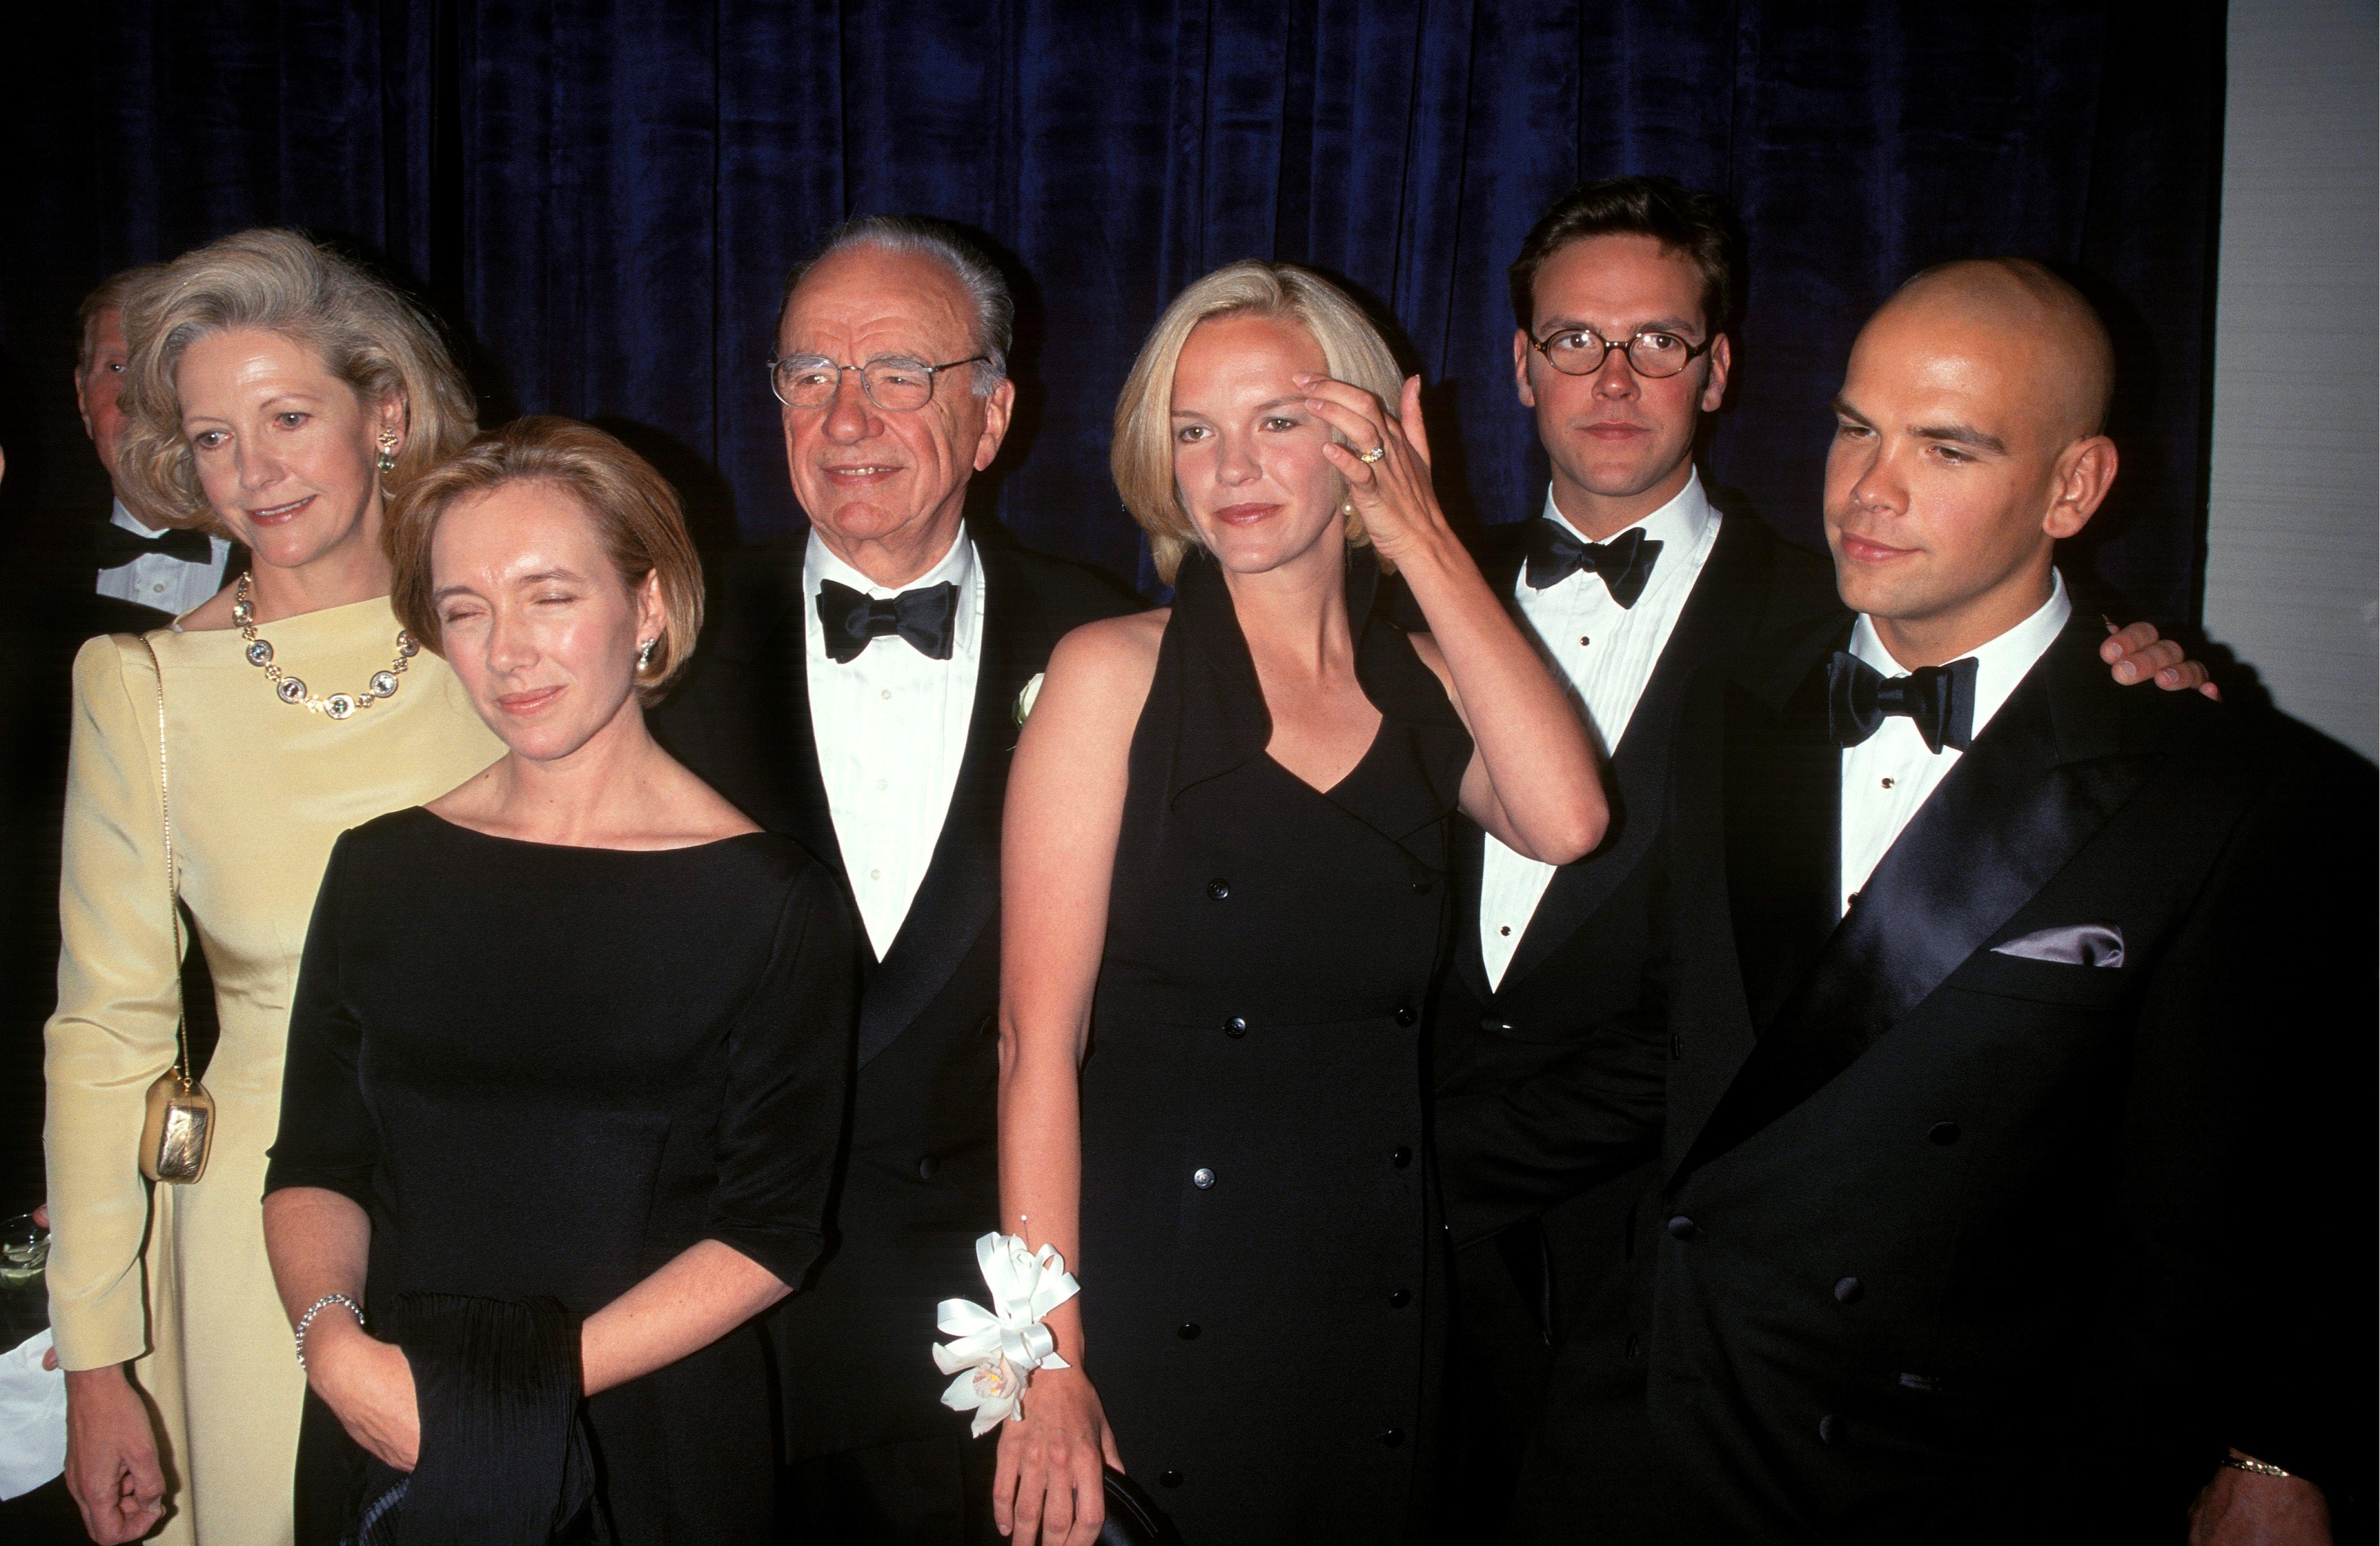 From left to right: Anna Maria Torv (Rupert’s wife from 1967-99), Prudence, Rupert, Elisabeth, James and Lachlan Murdoch in New York in 1997